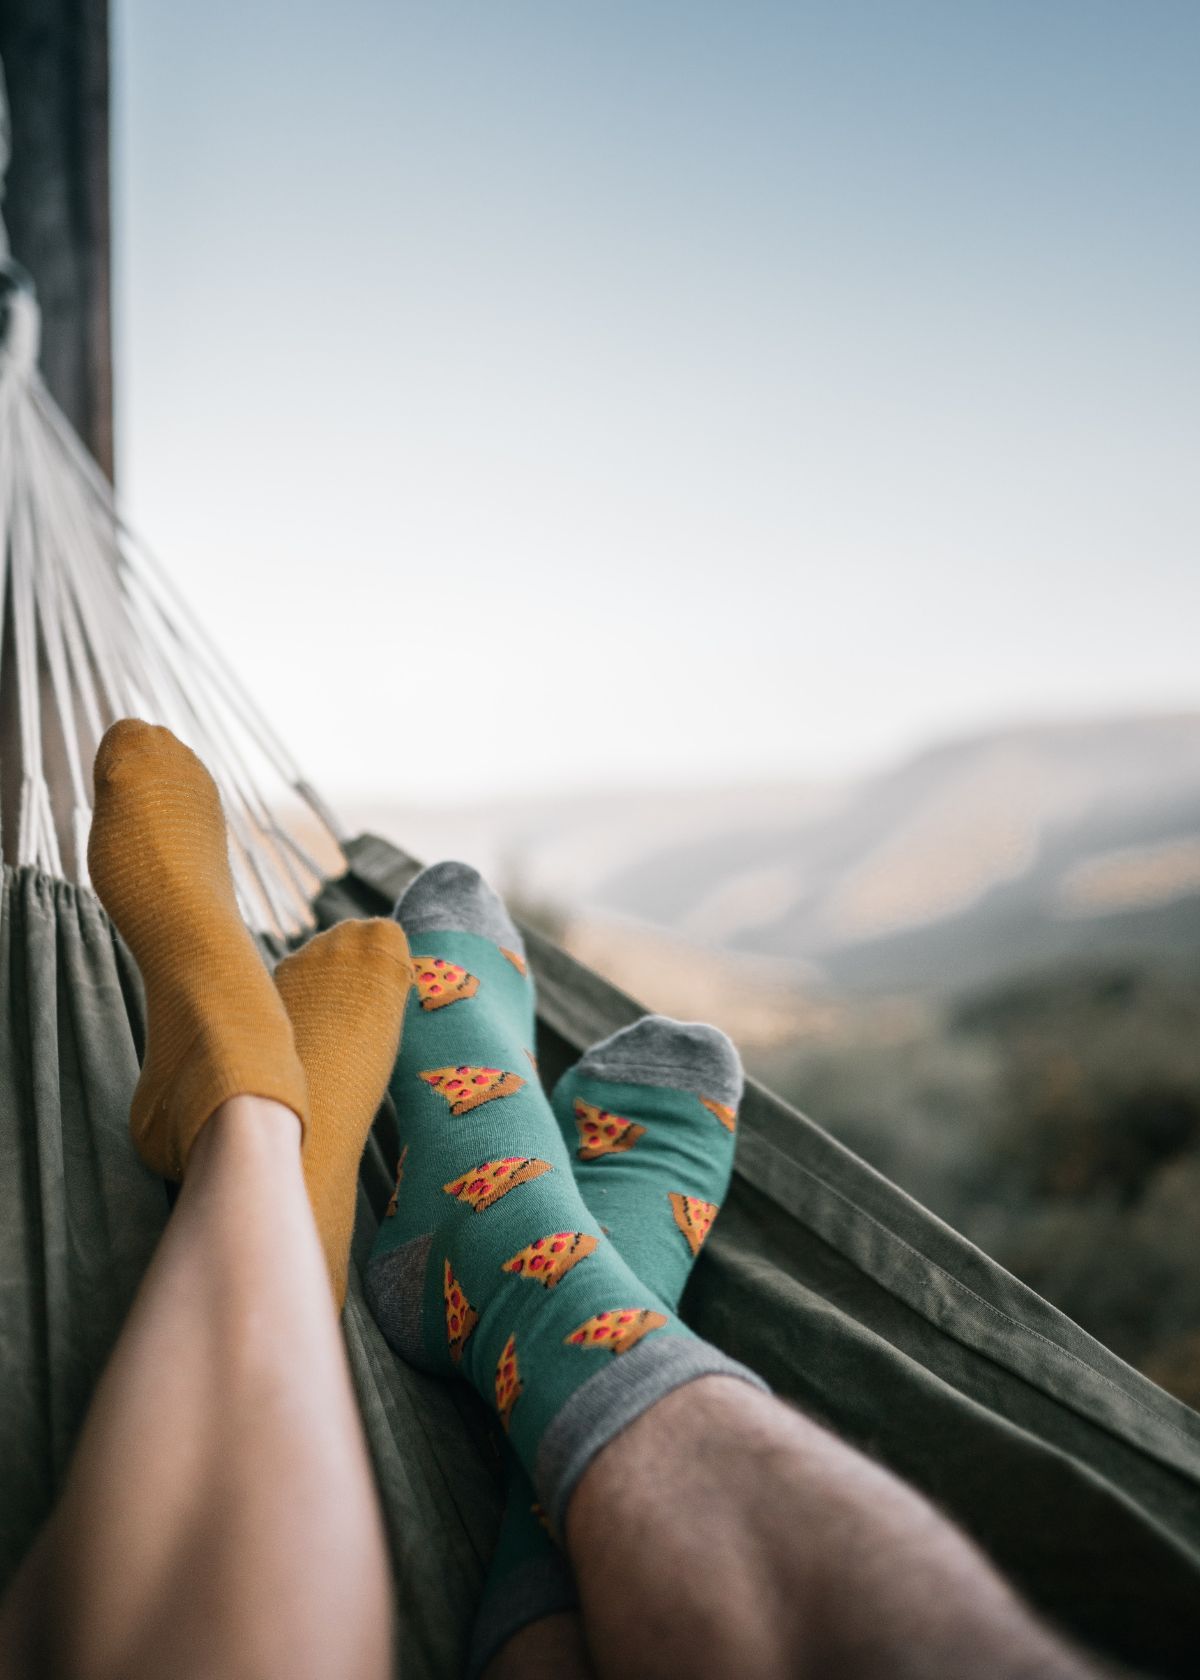 Sleeping Comfortably in a Hammock: A New Take on Camping Comforts